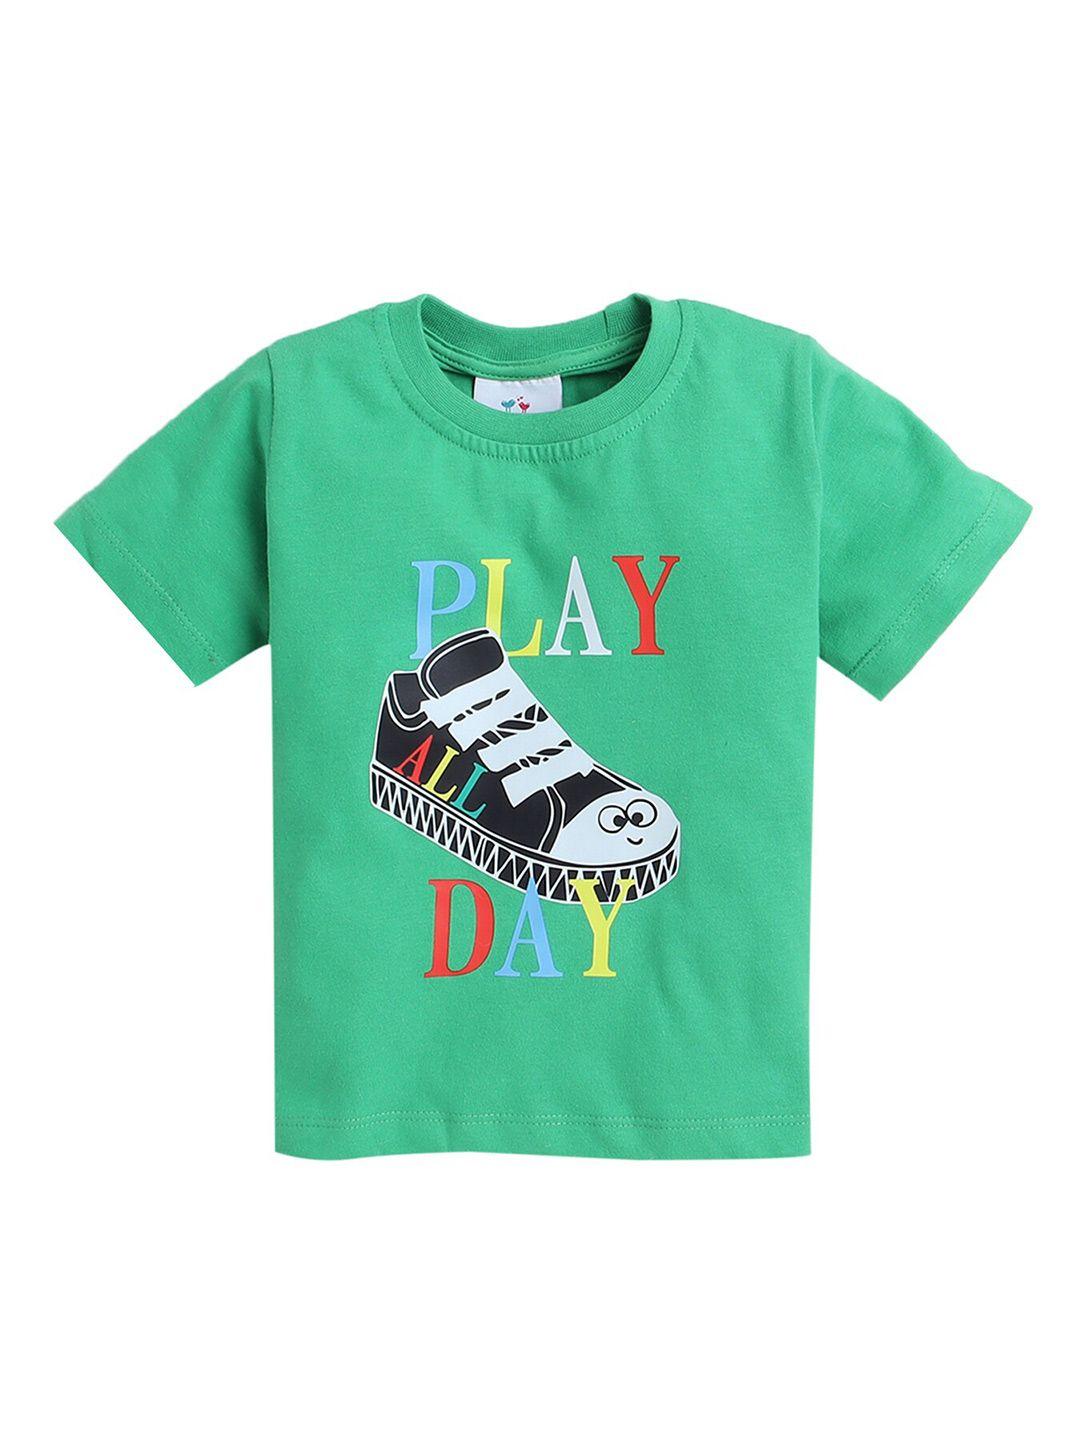 Knitting Doodles Boys Graphic Printed Cotton T-shirt